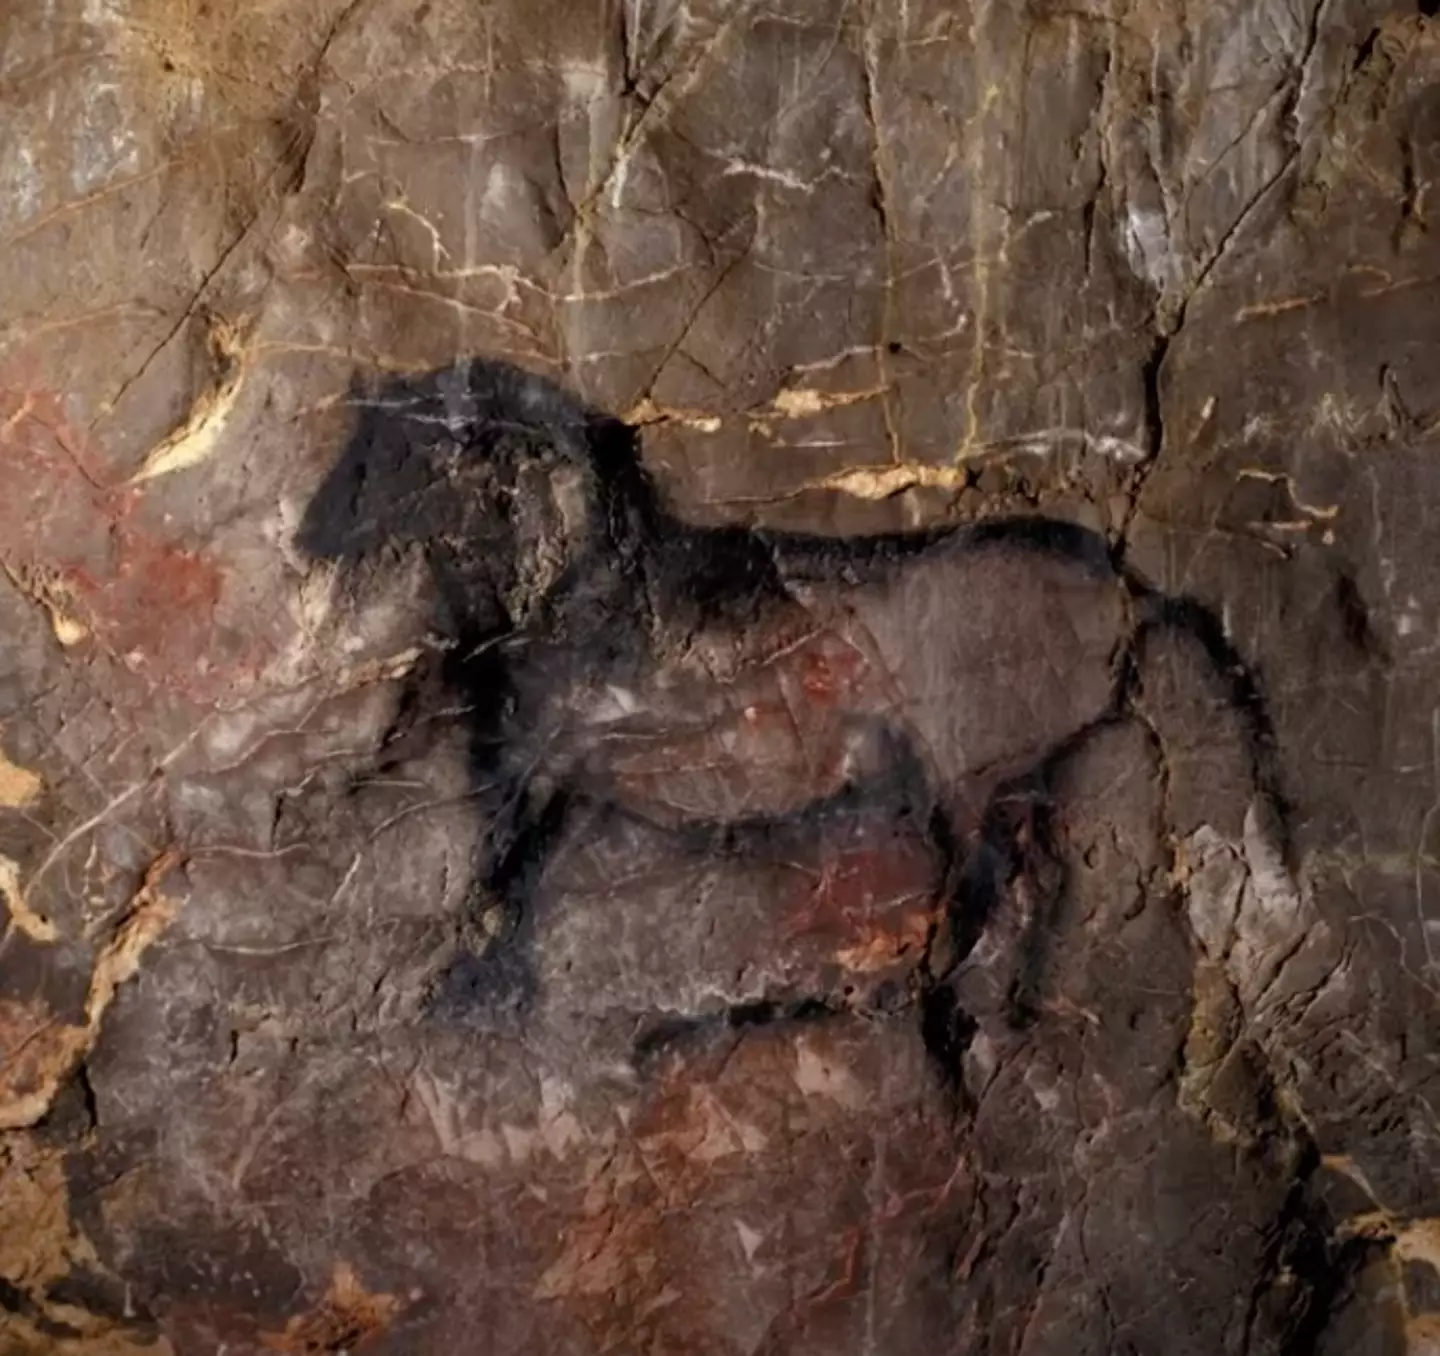 There is hundreds of years' worth of artwork in the cave.